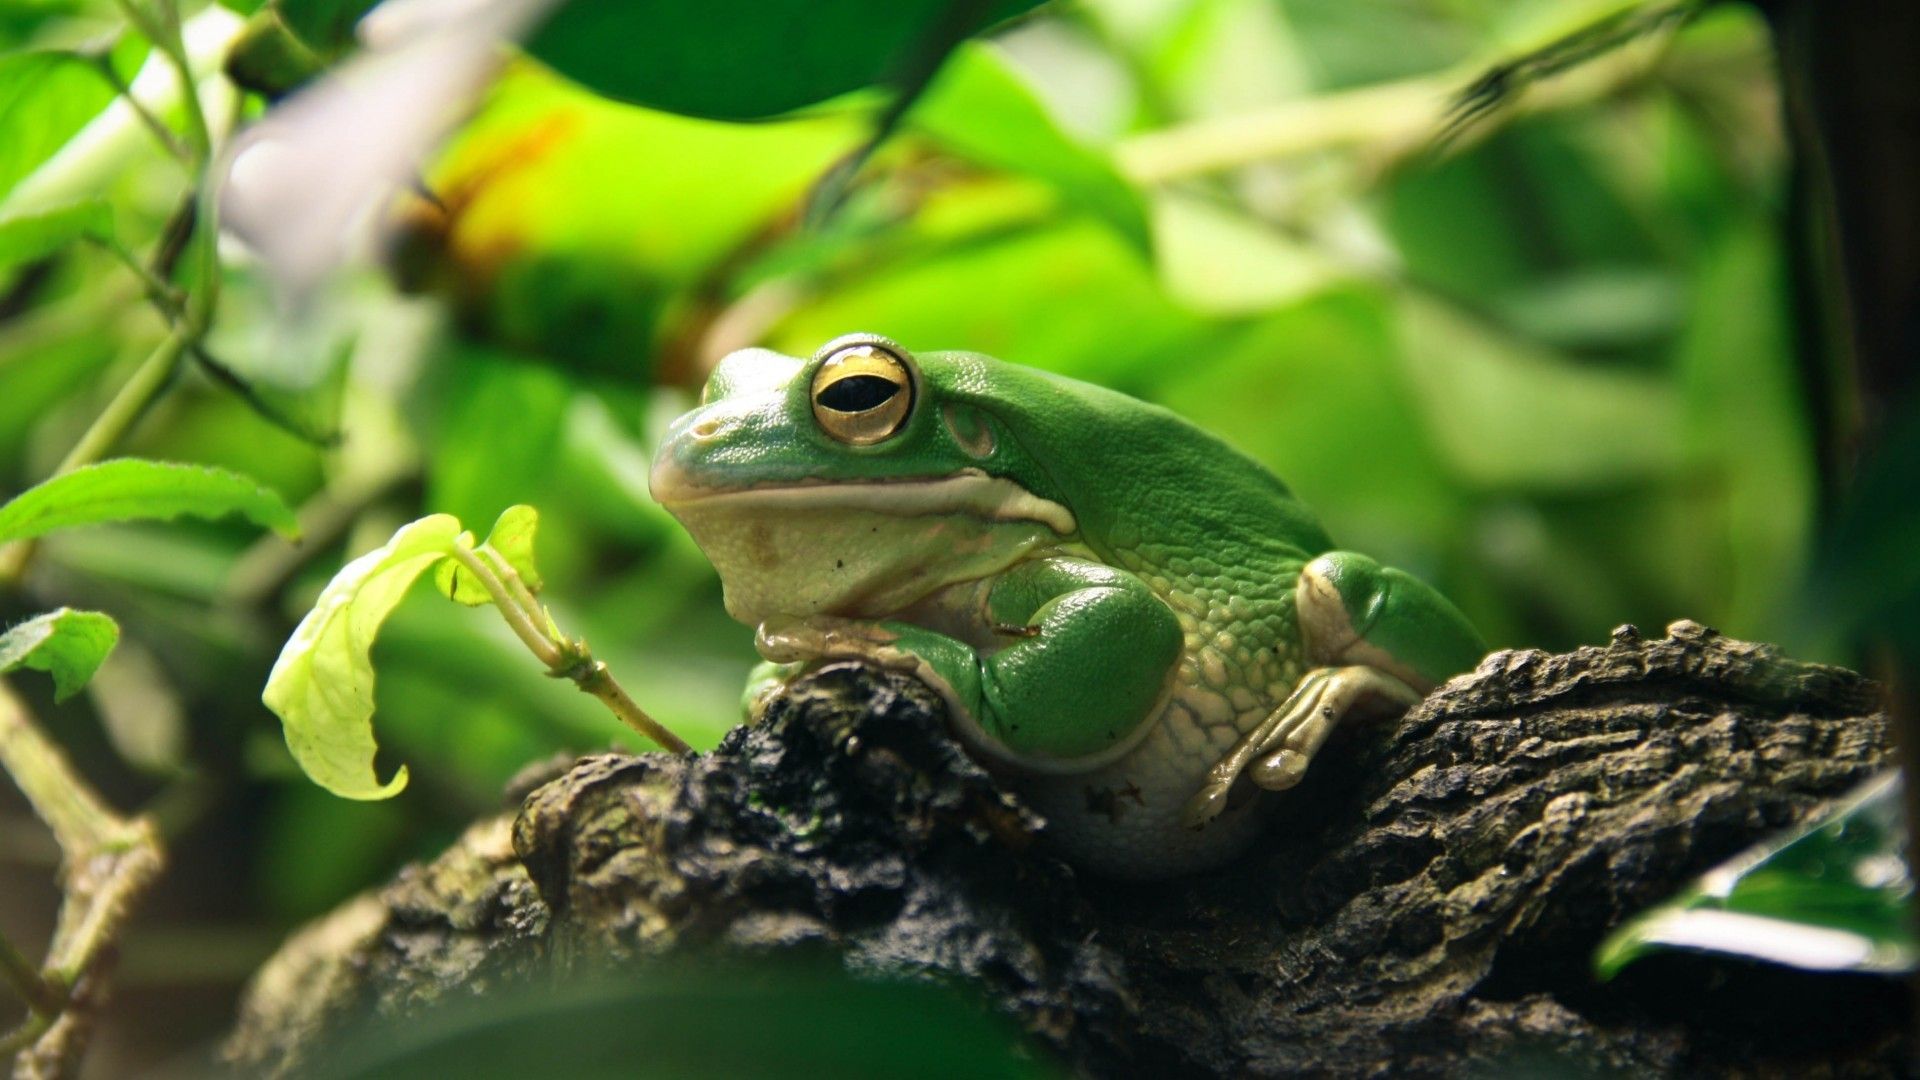 1920x1080 Download 1920x1080 Green Frog Leaves Amphibian Wallpaper For Widescreen